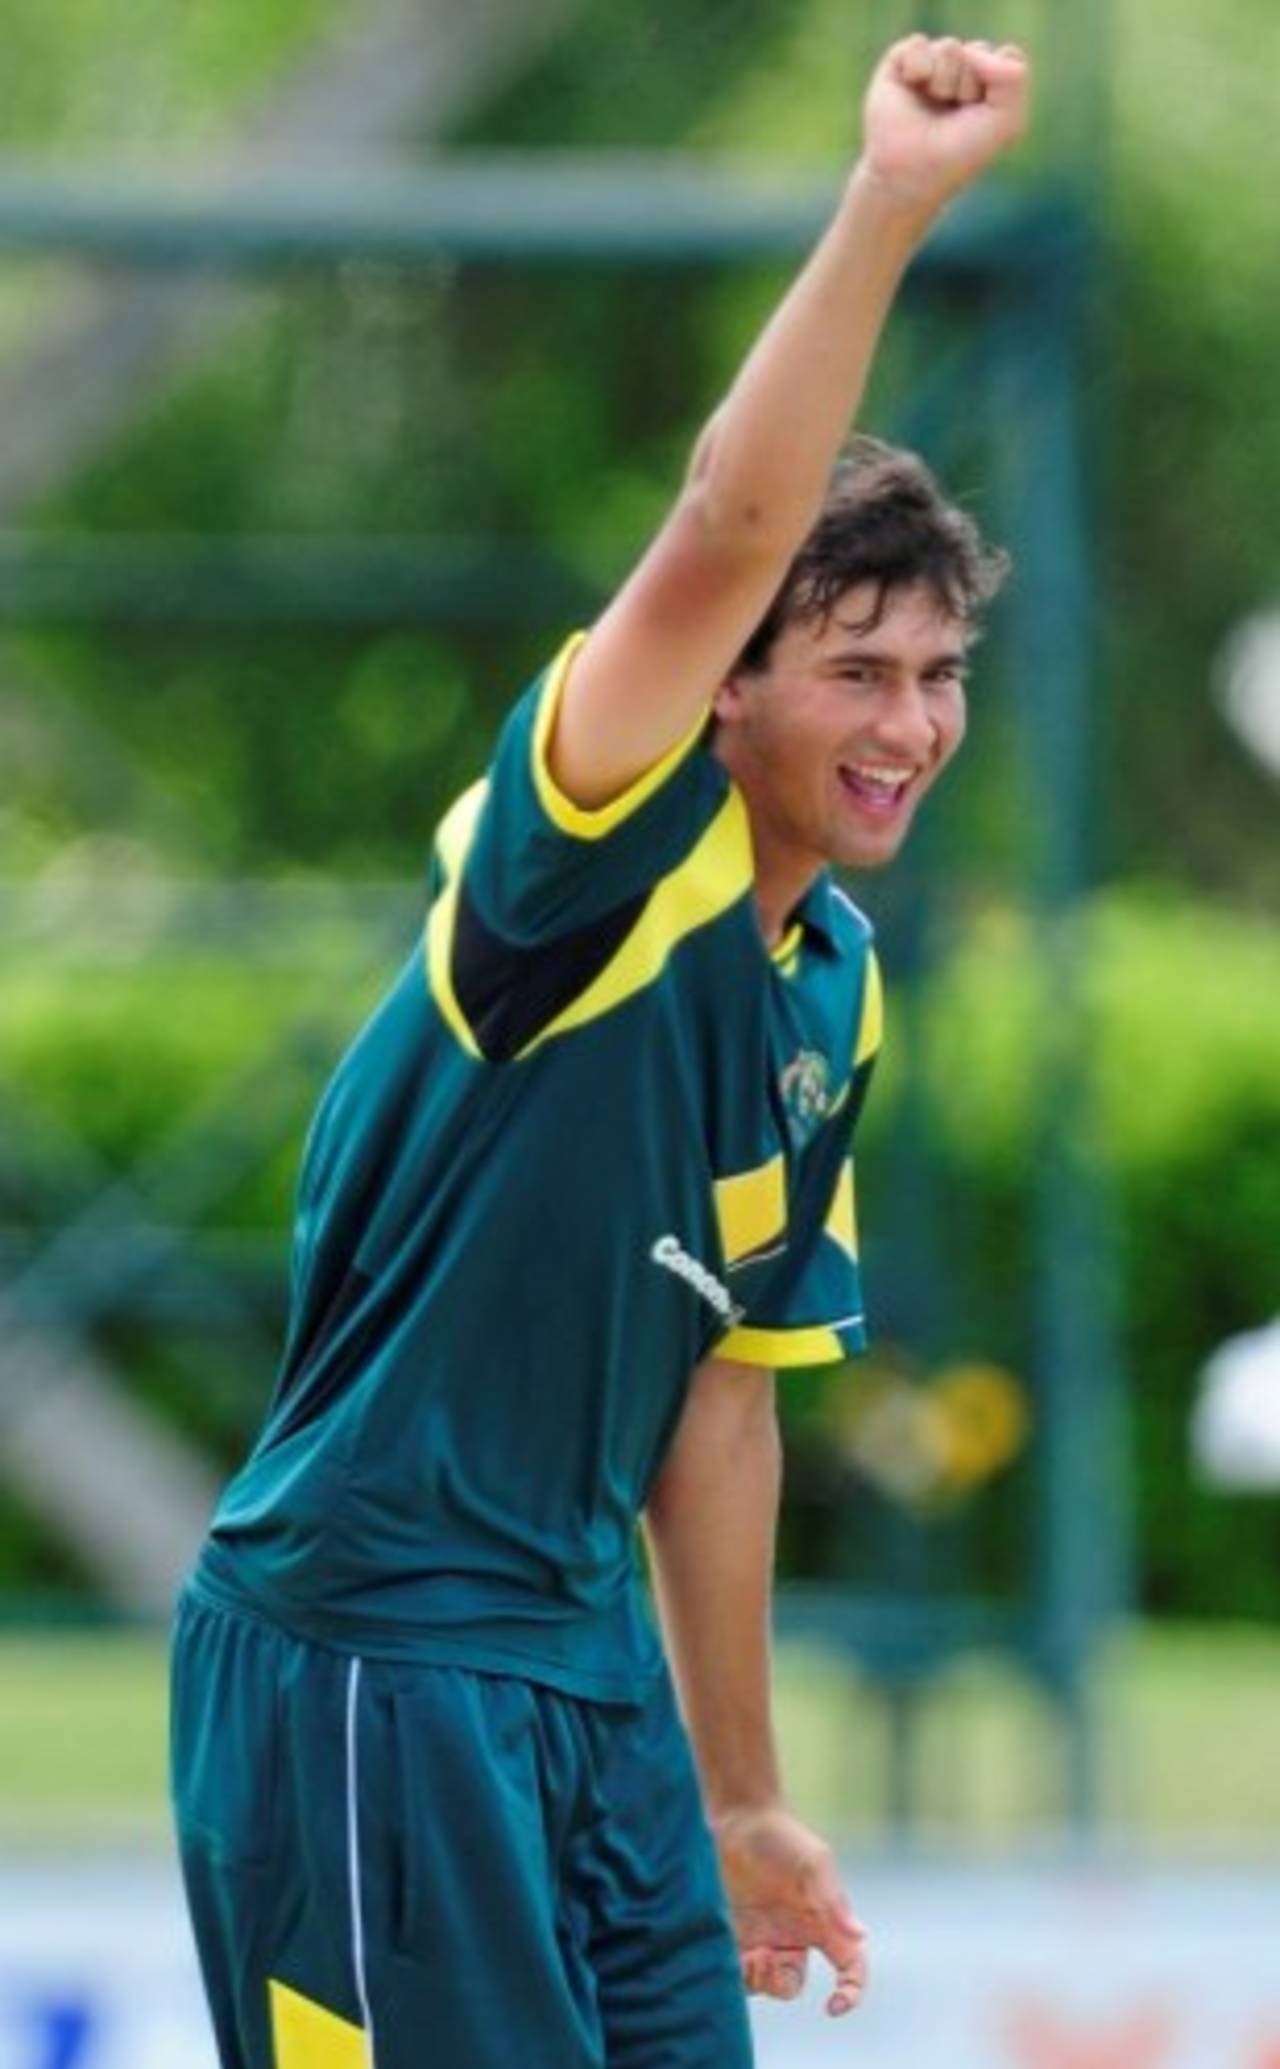 The left-arm spinner Ashton Agar, who will represent Australia at the Under-19 World Cup this year, has joined the Warriors&nbsp;&nbsp;&bull;&nbsp;&nbsp;Getty Images